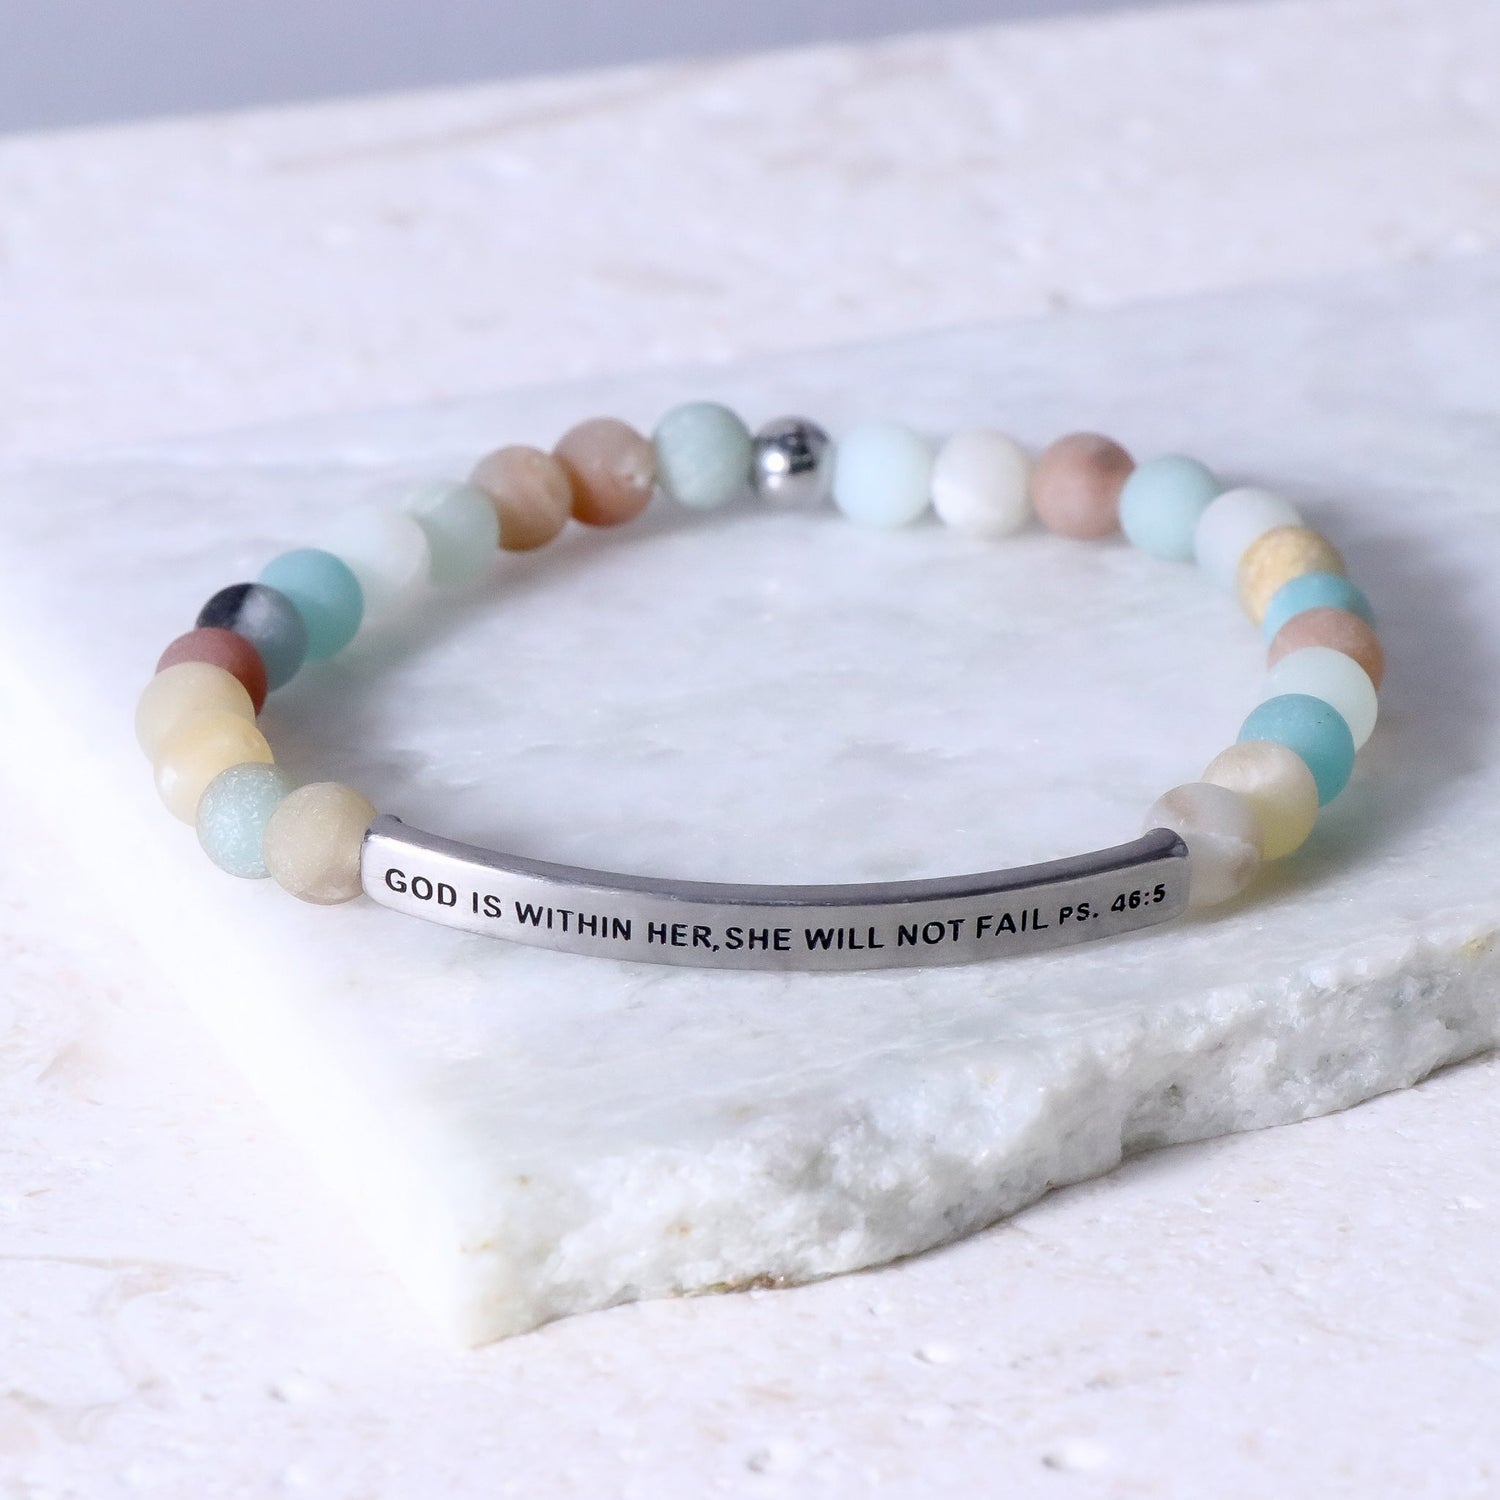 GOD IS WITHIN HER SHE WILL NOT FAIL - Psalms 46:5 - Kids Collection - Inspiration Co.